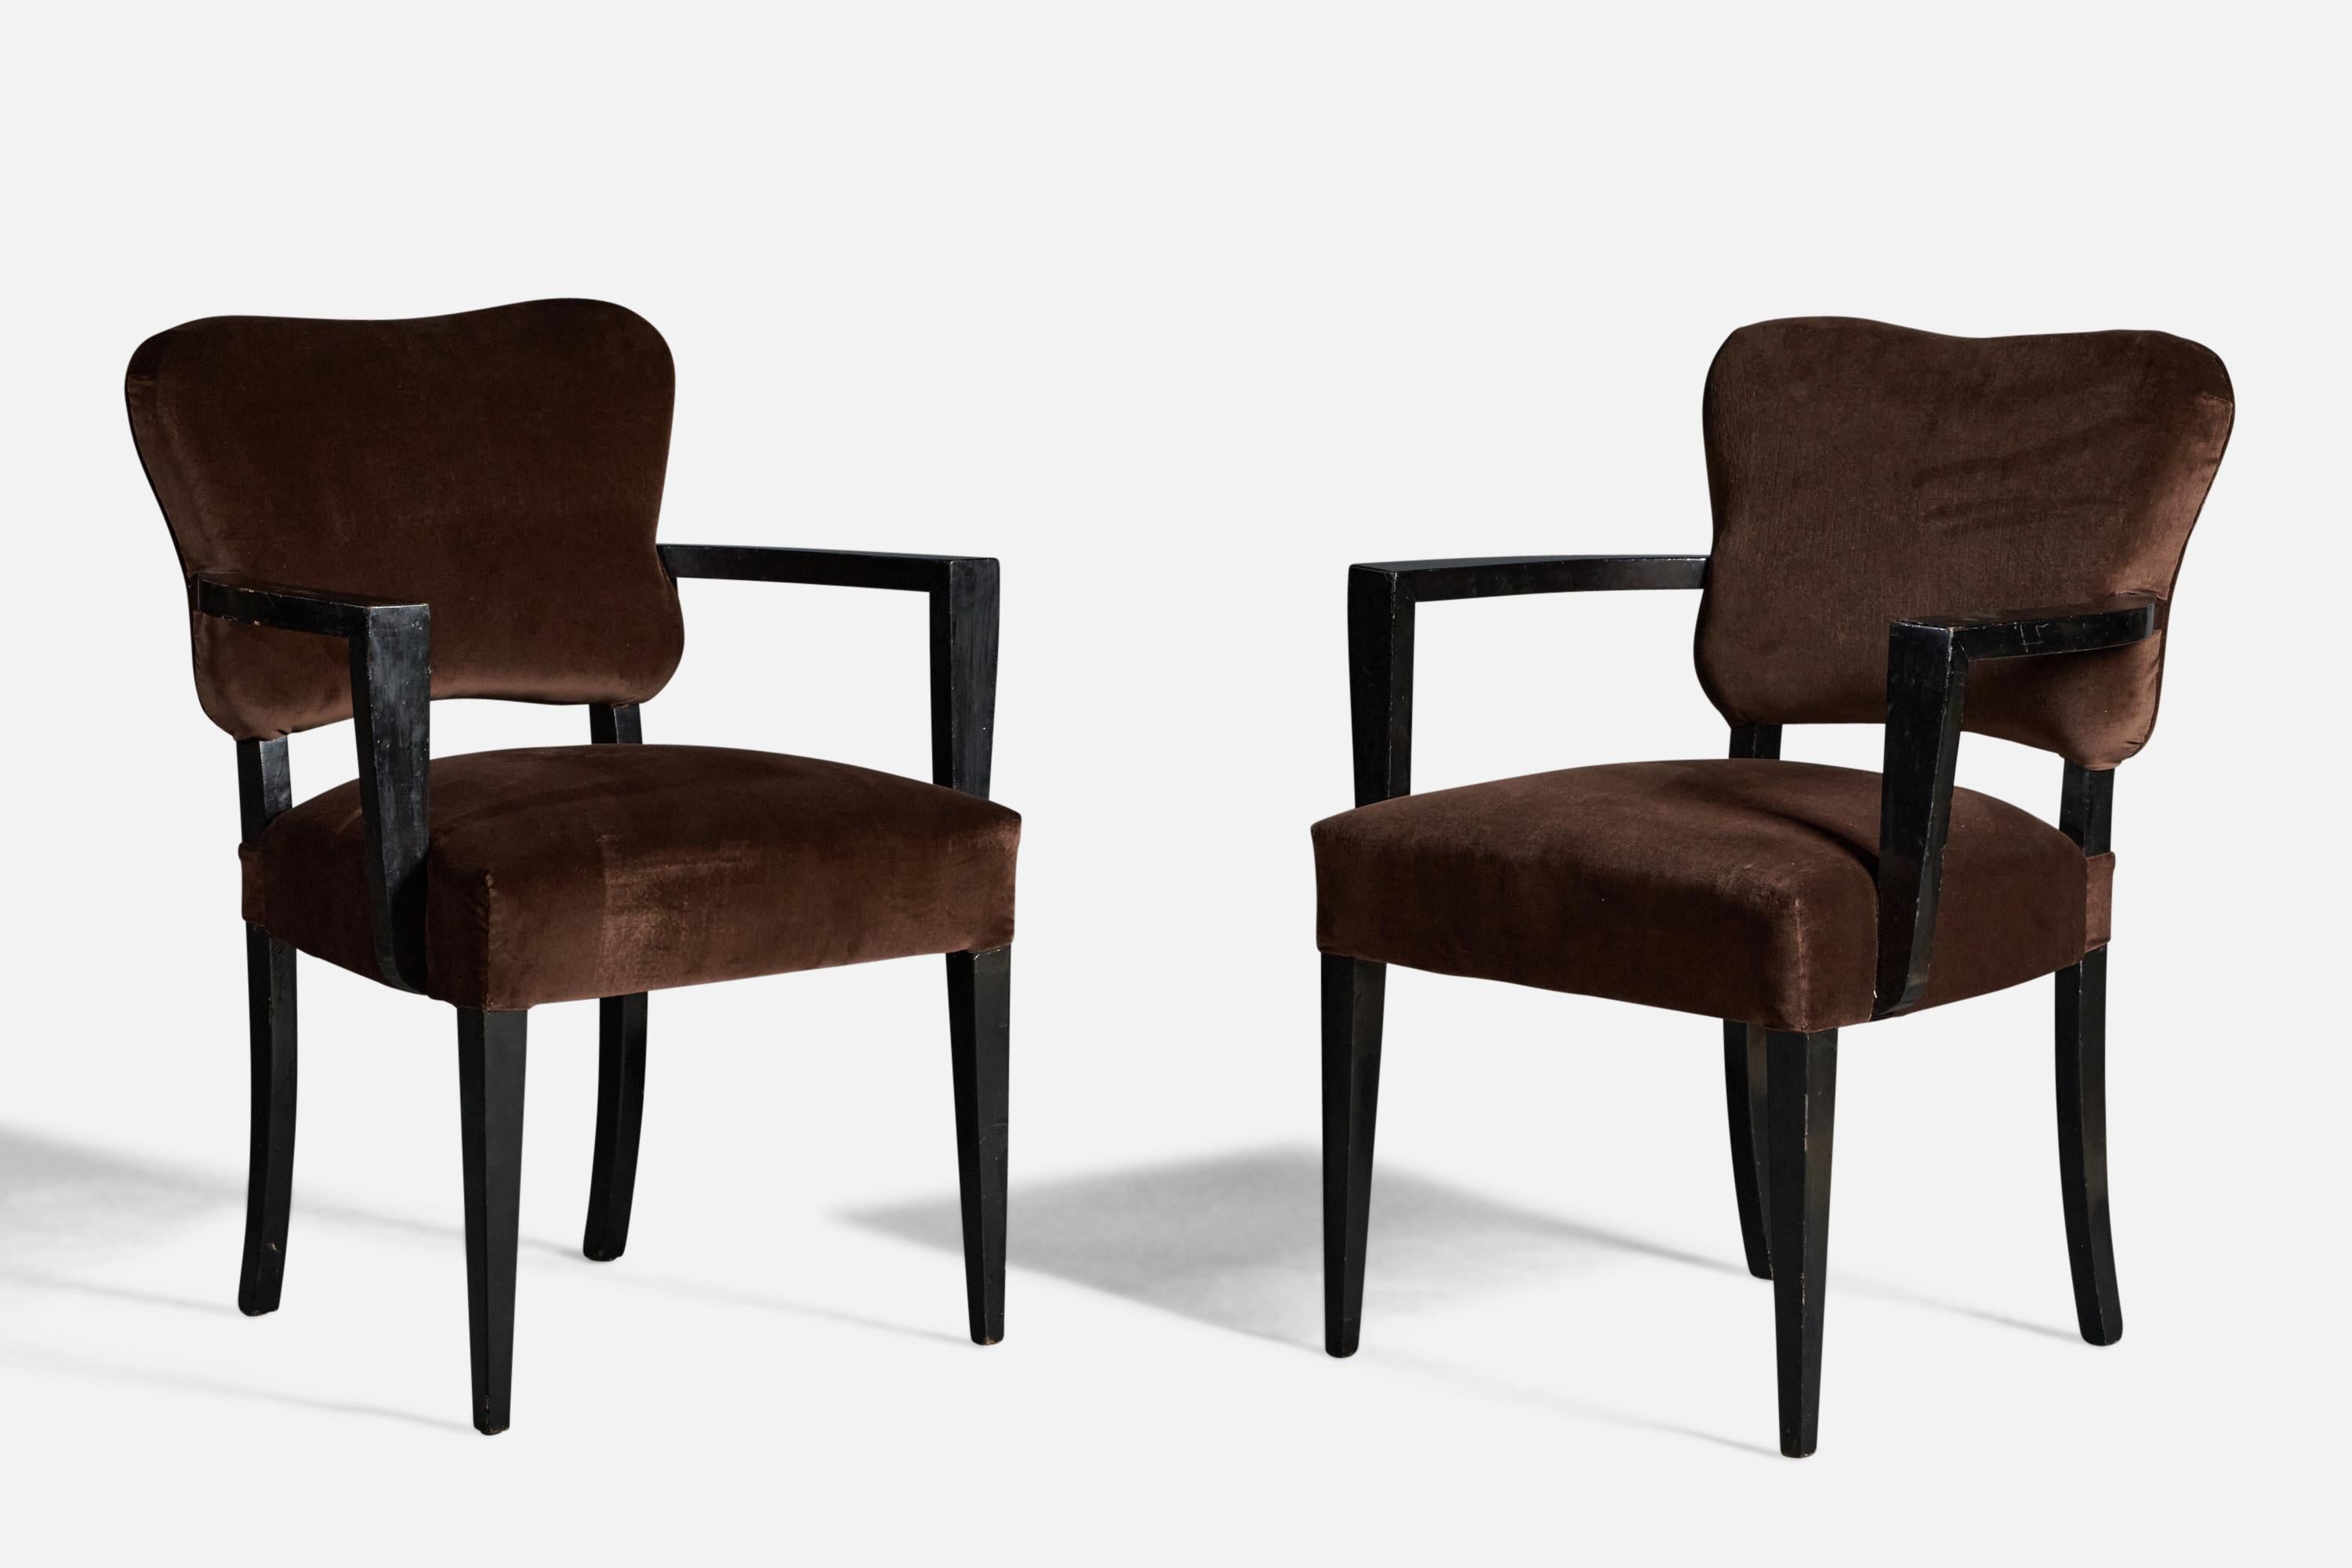 A pair of black-lacquer wood and brown velvet armchairs, designed and produced by James Mont, USA, c. 1940s.
